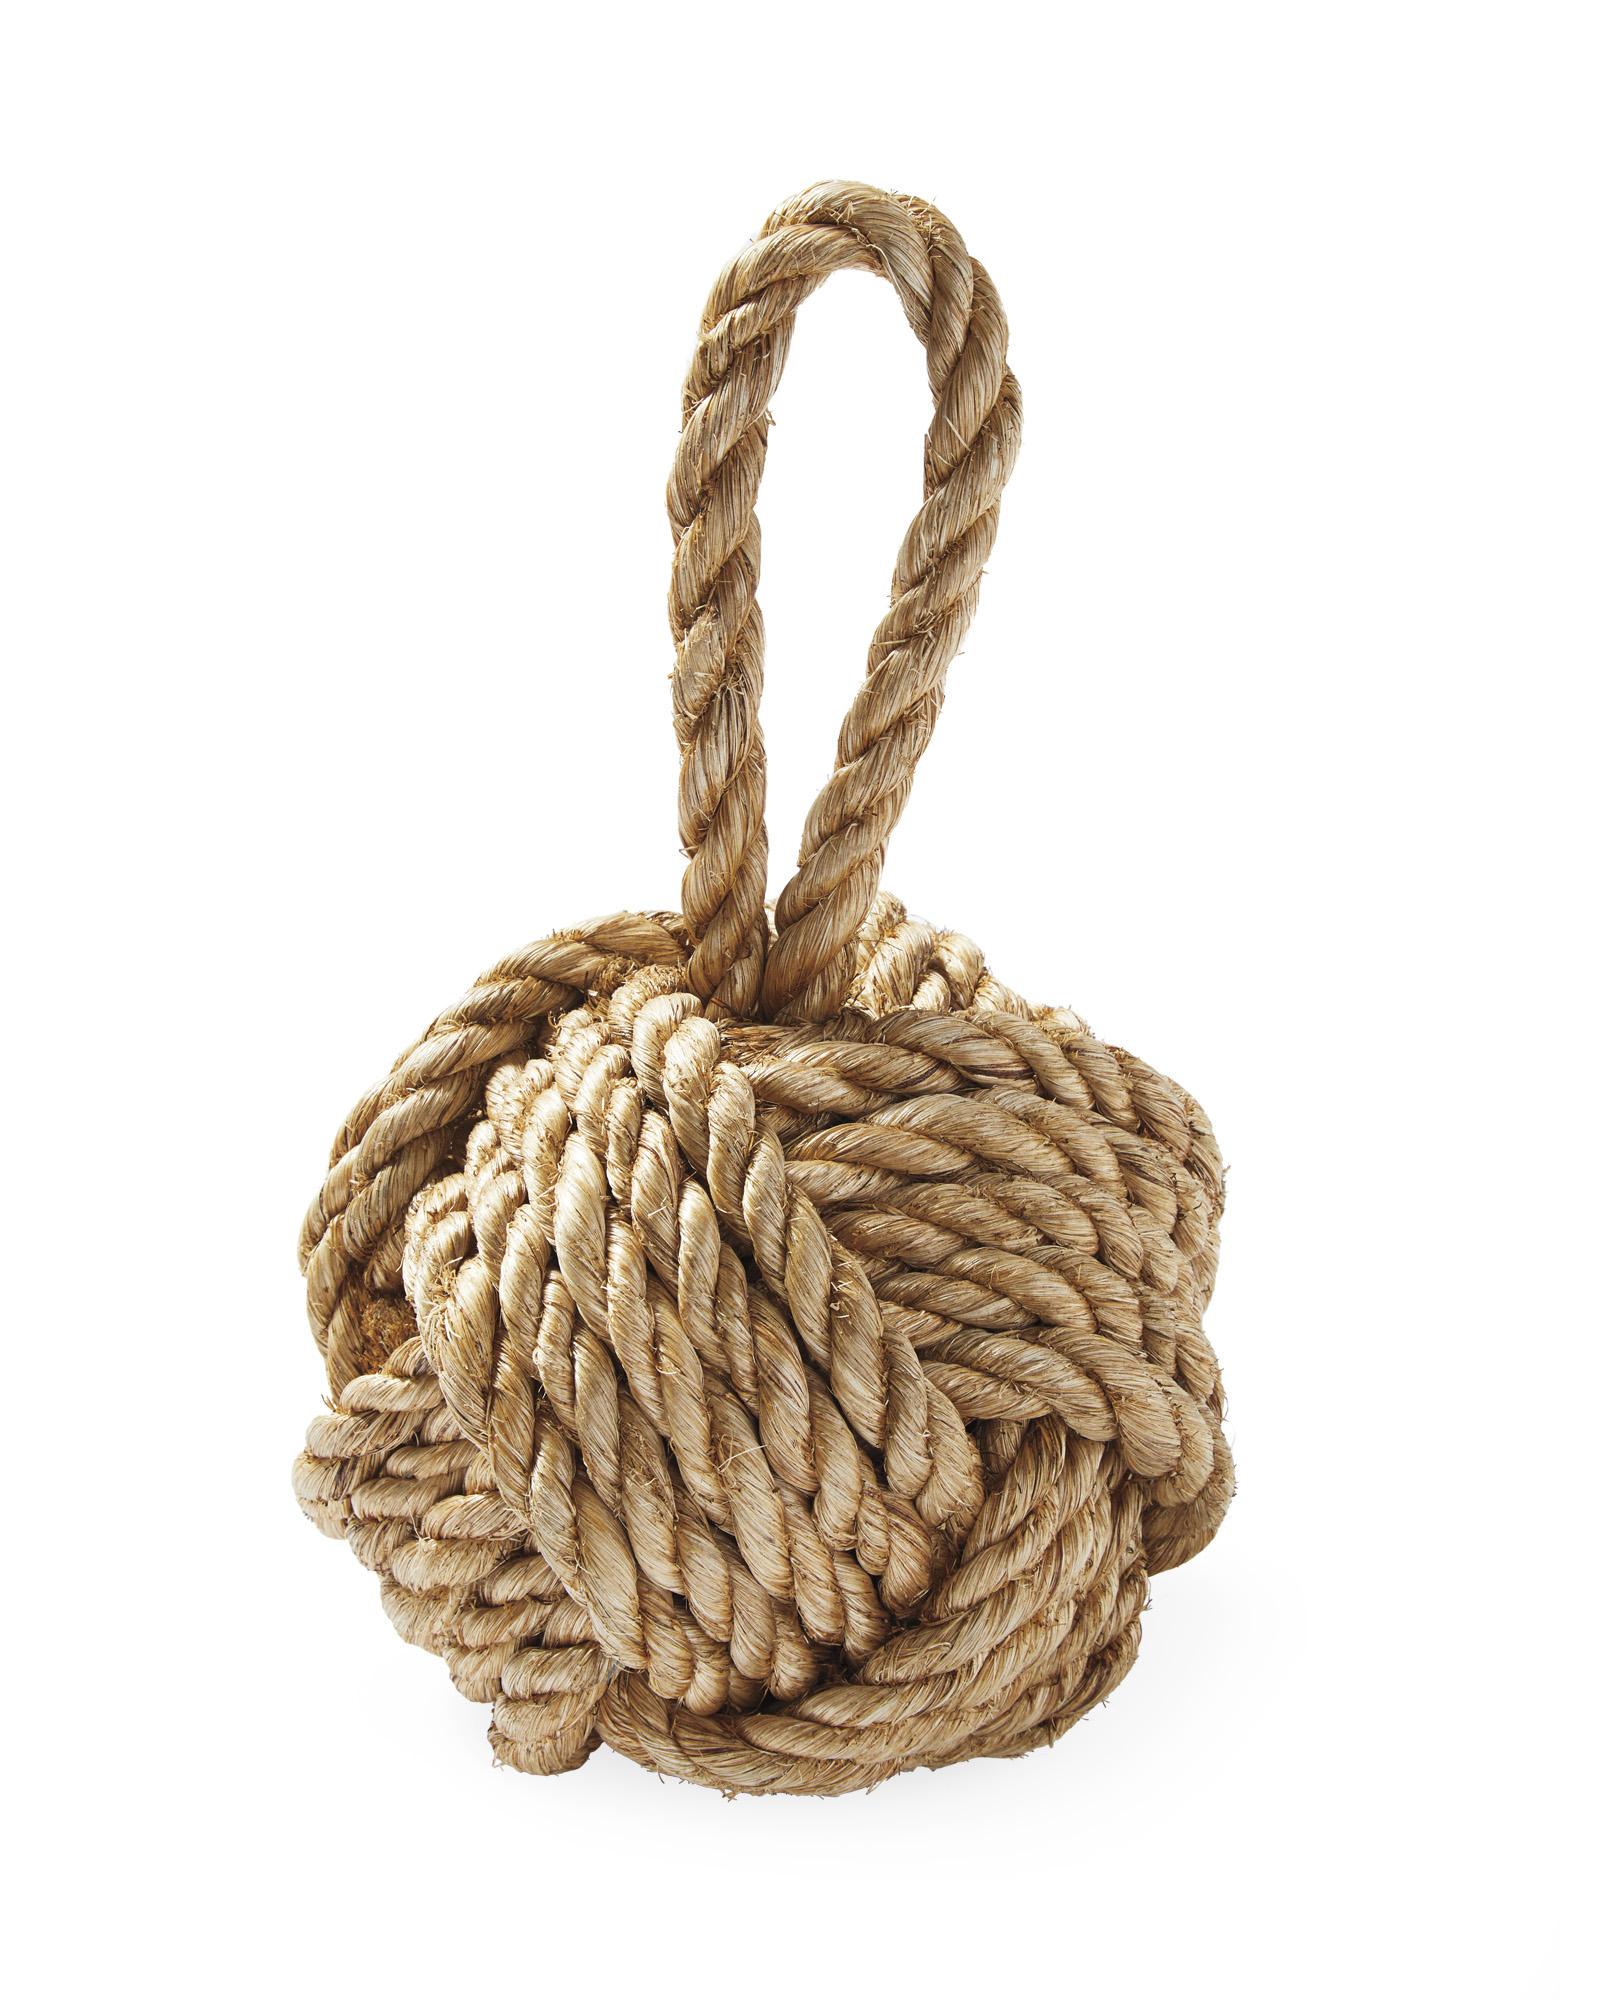 Pair of Small Rope Ball Nautical Decorations - Beautiful Rope Decor